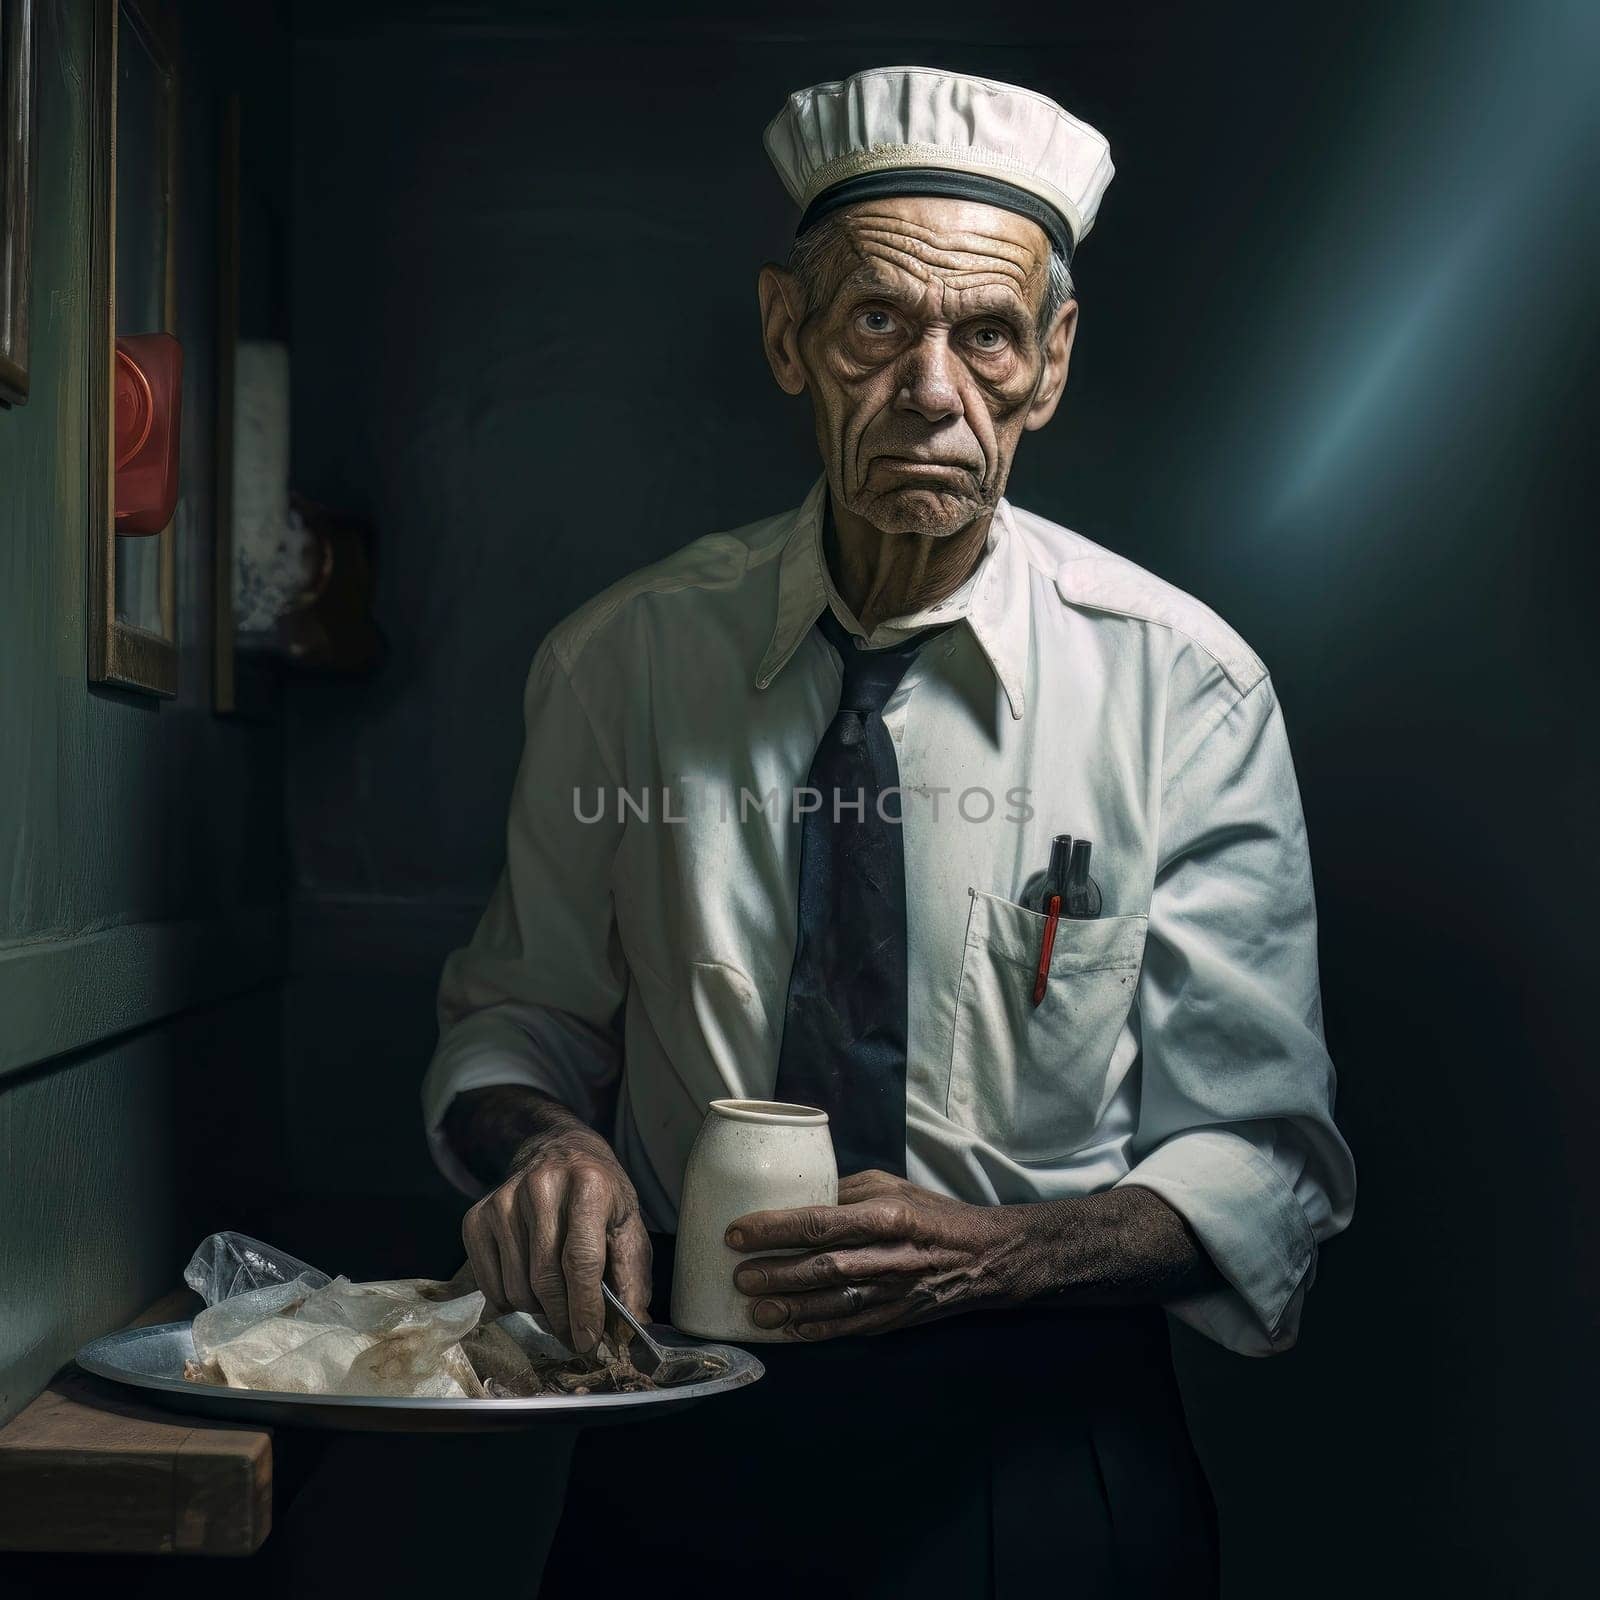 A poignant image of an elderly chef, exhausted and disillusioned with his profession.